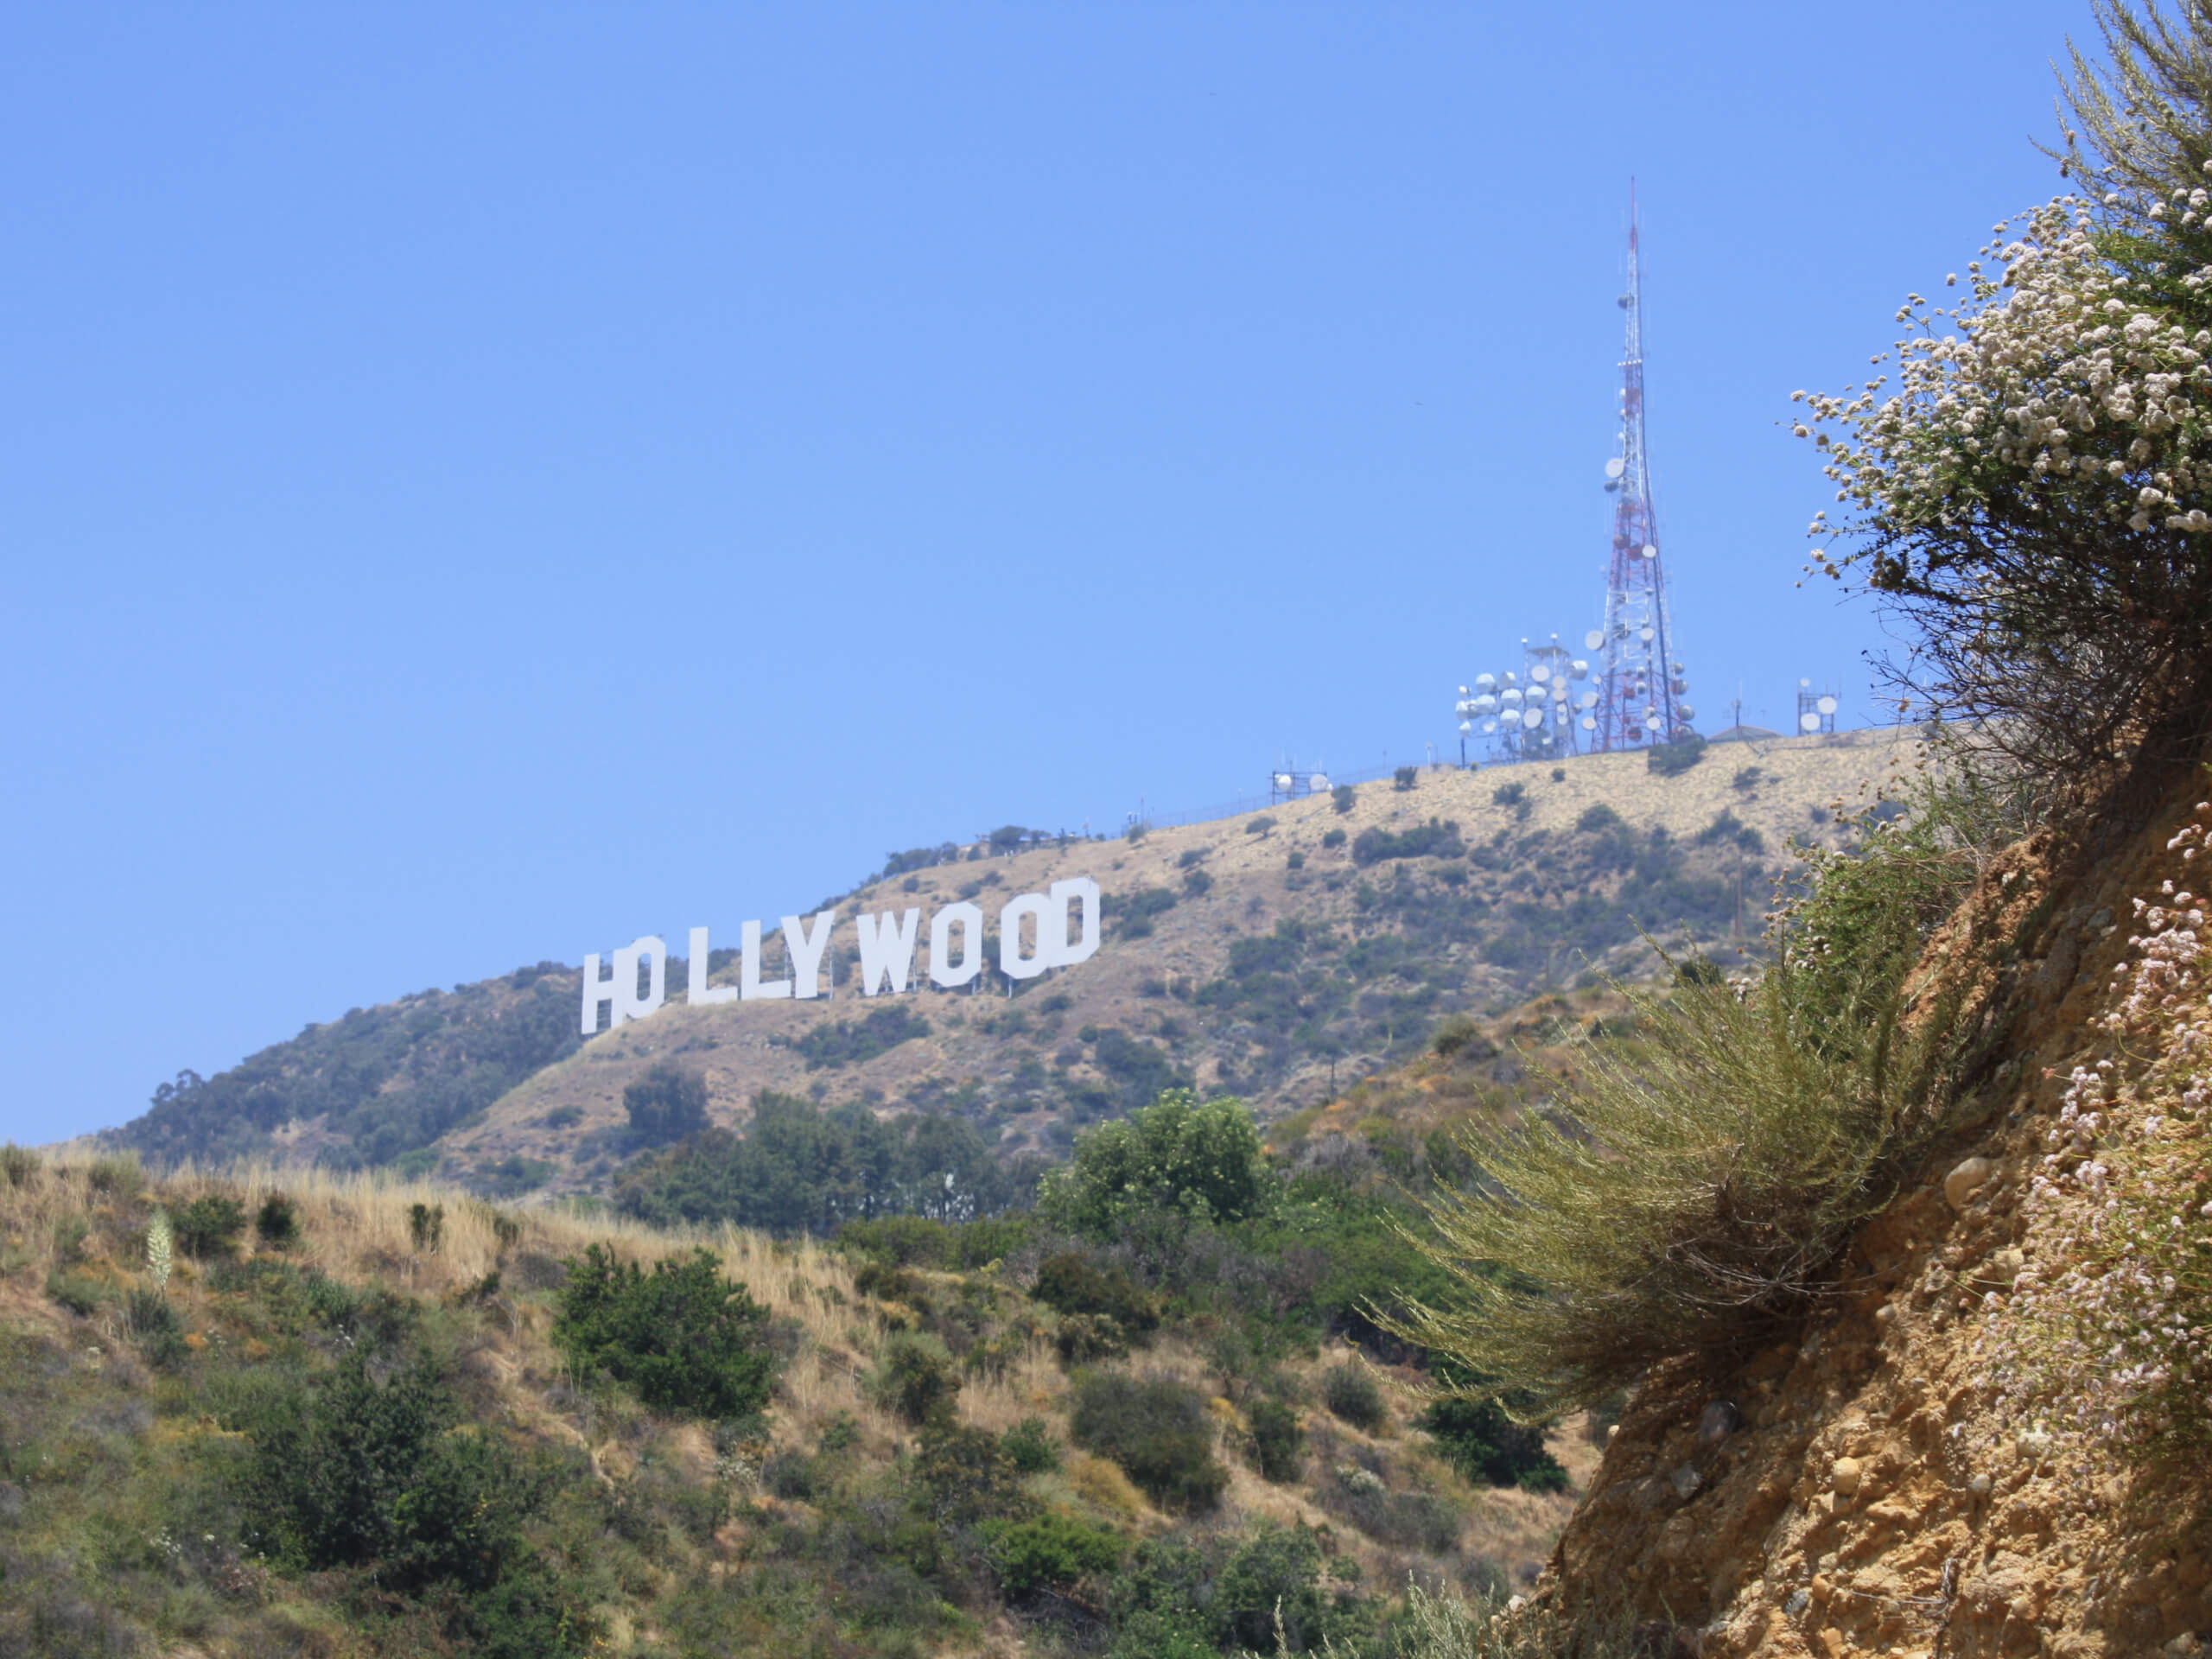 Hollyridge Trail to Hollywood Sign Viewpoint